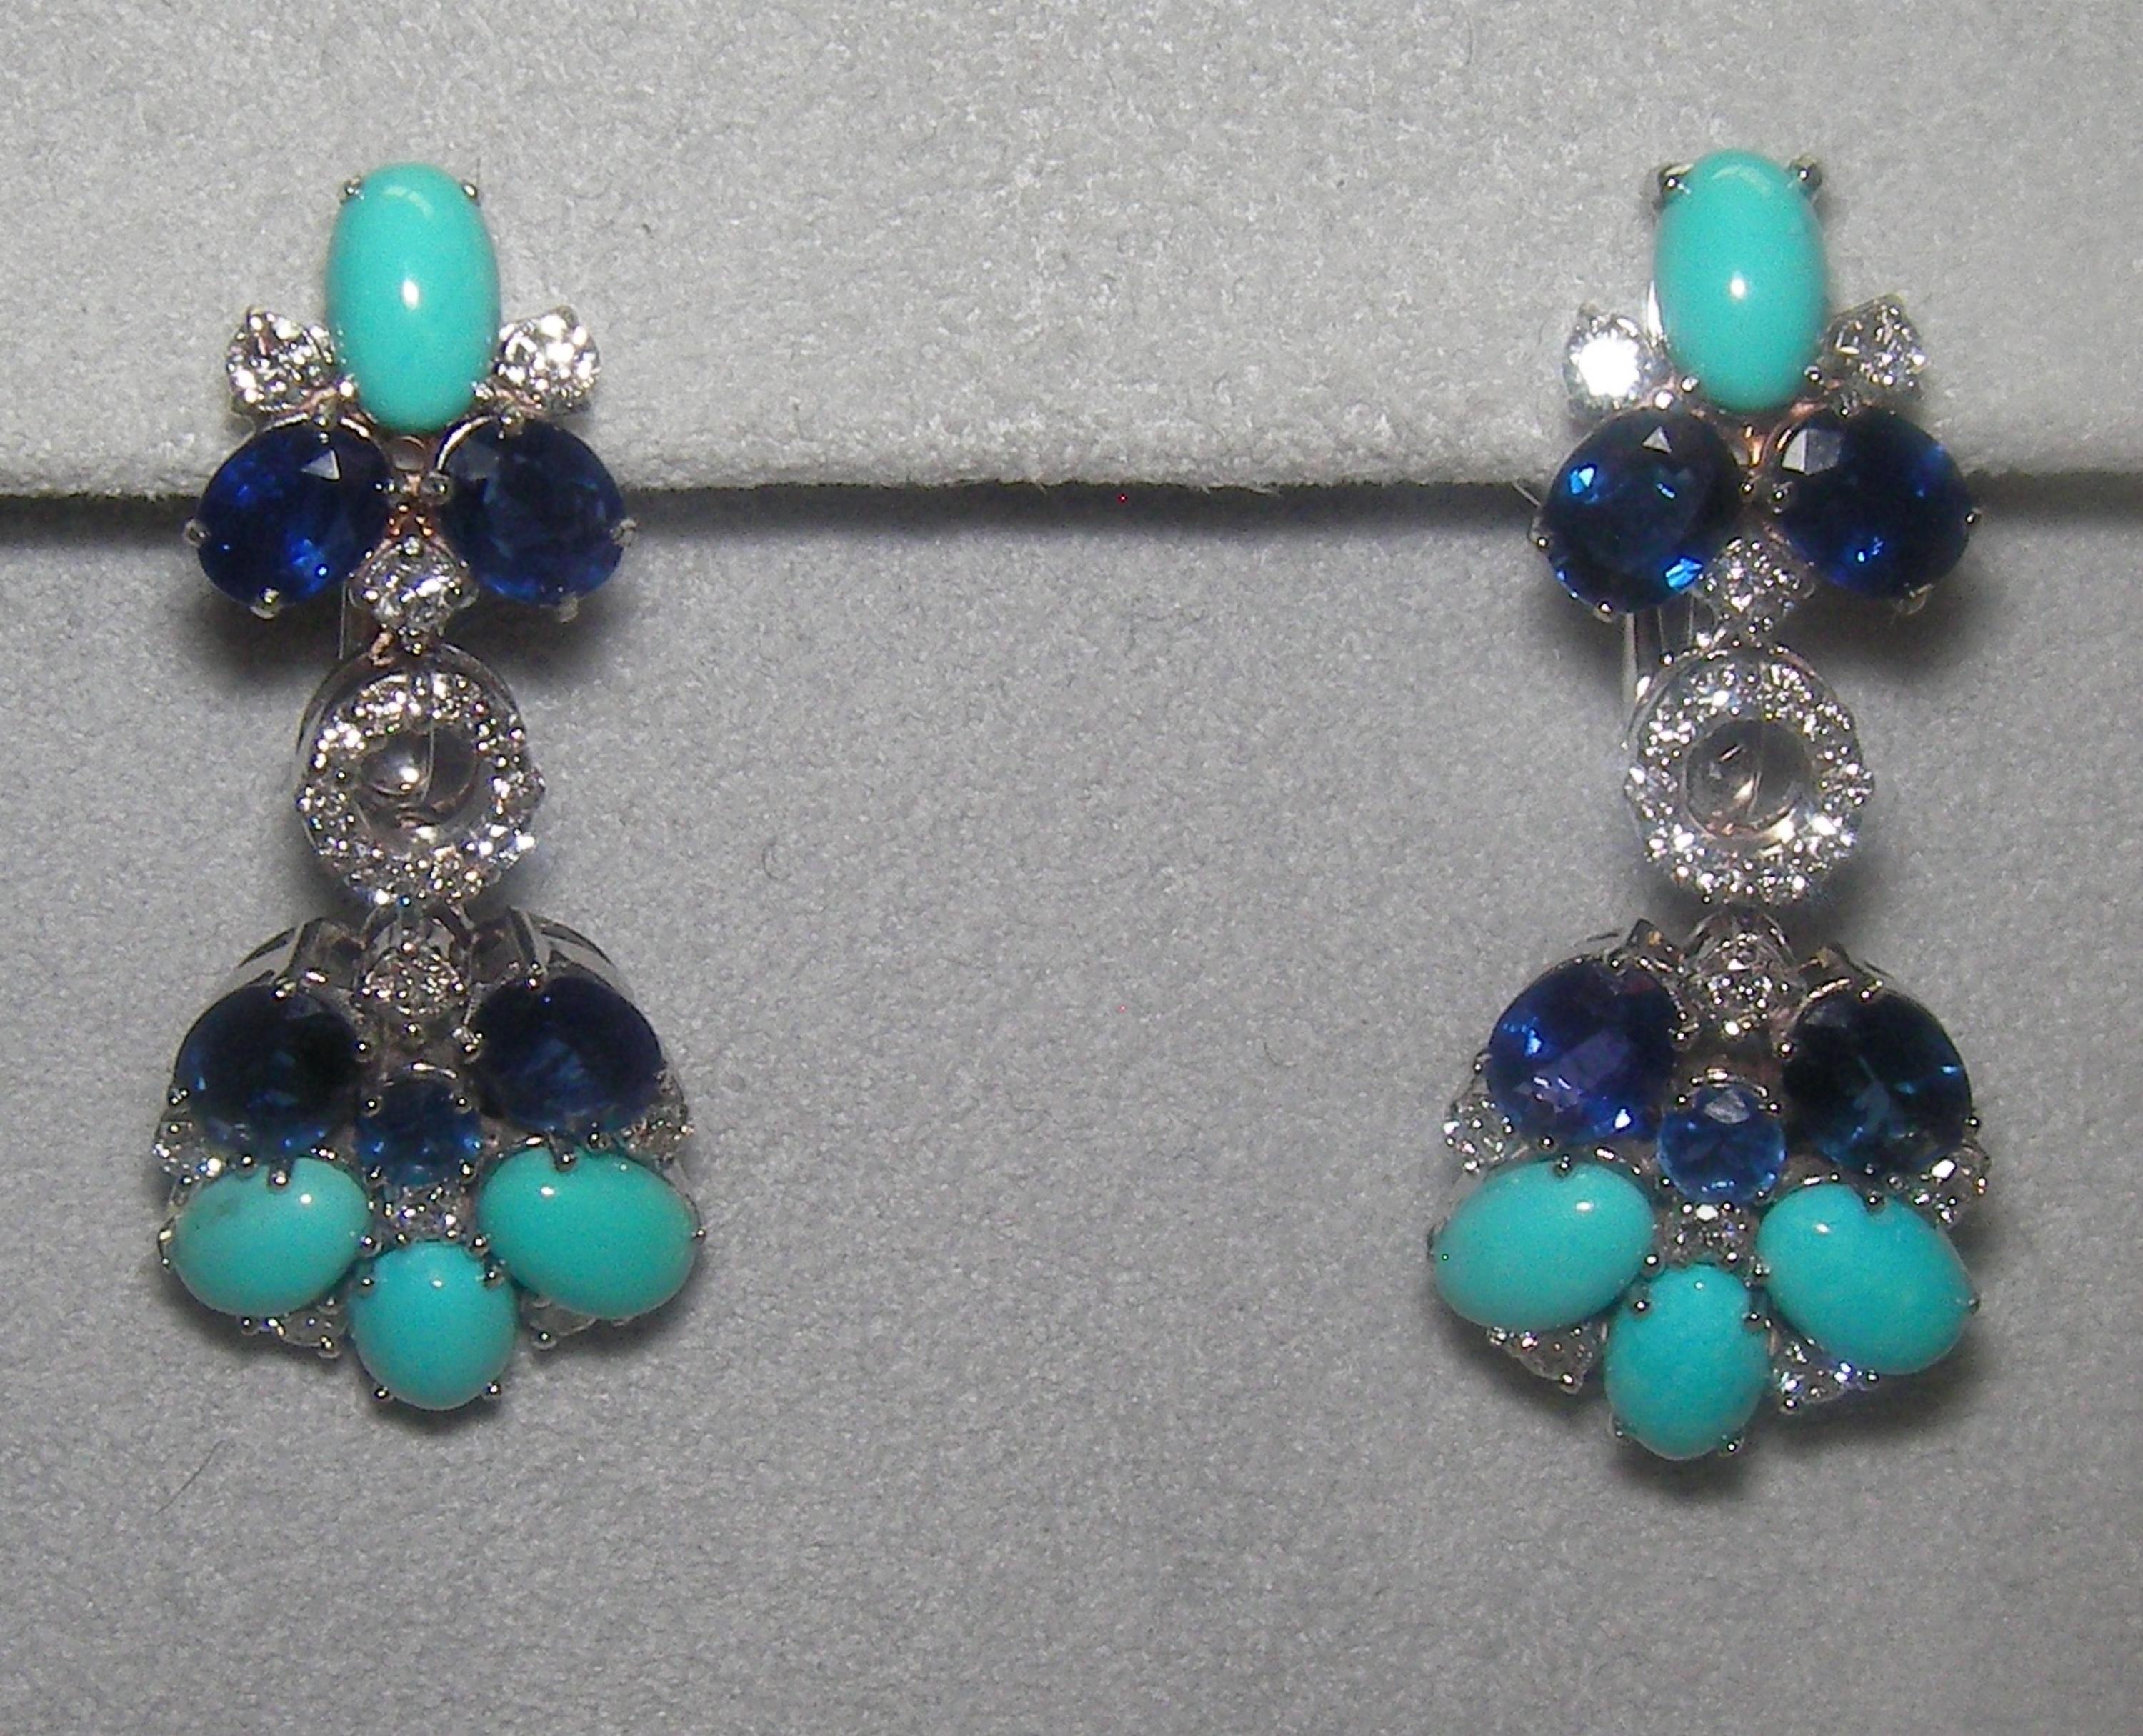 These stunning 18 Karat White Gold Diamond, Sapphire, and Turquoise Dangle Earrings feature an array of cabochon recon turquoise and oval and rounded cut sapphire. These earrings go perfectly with our 18 Karat White Gold Diamond, Sapphire, and